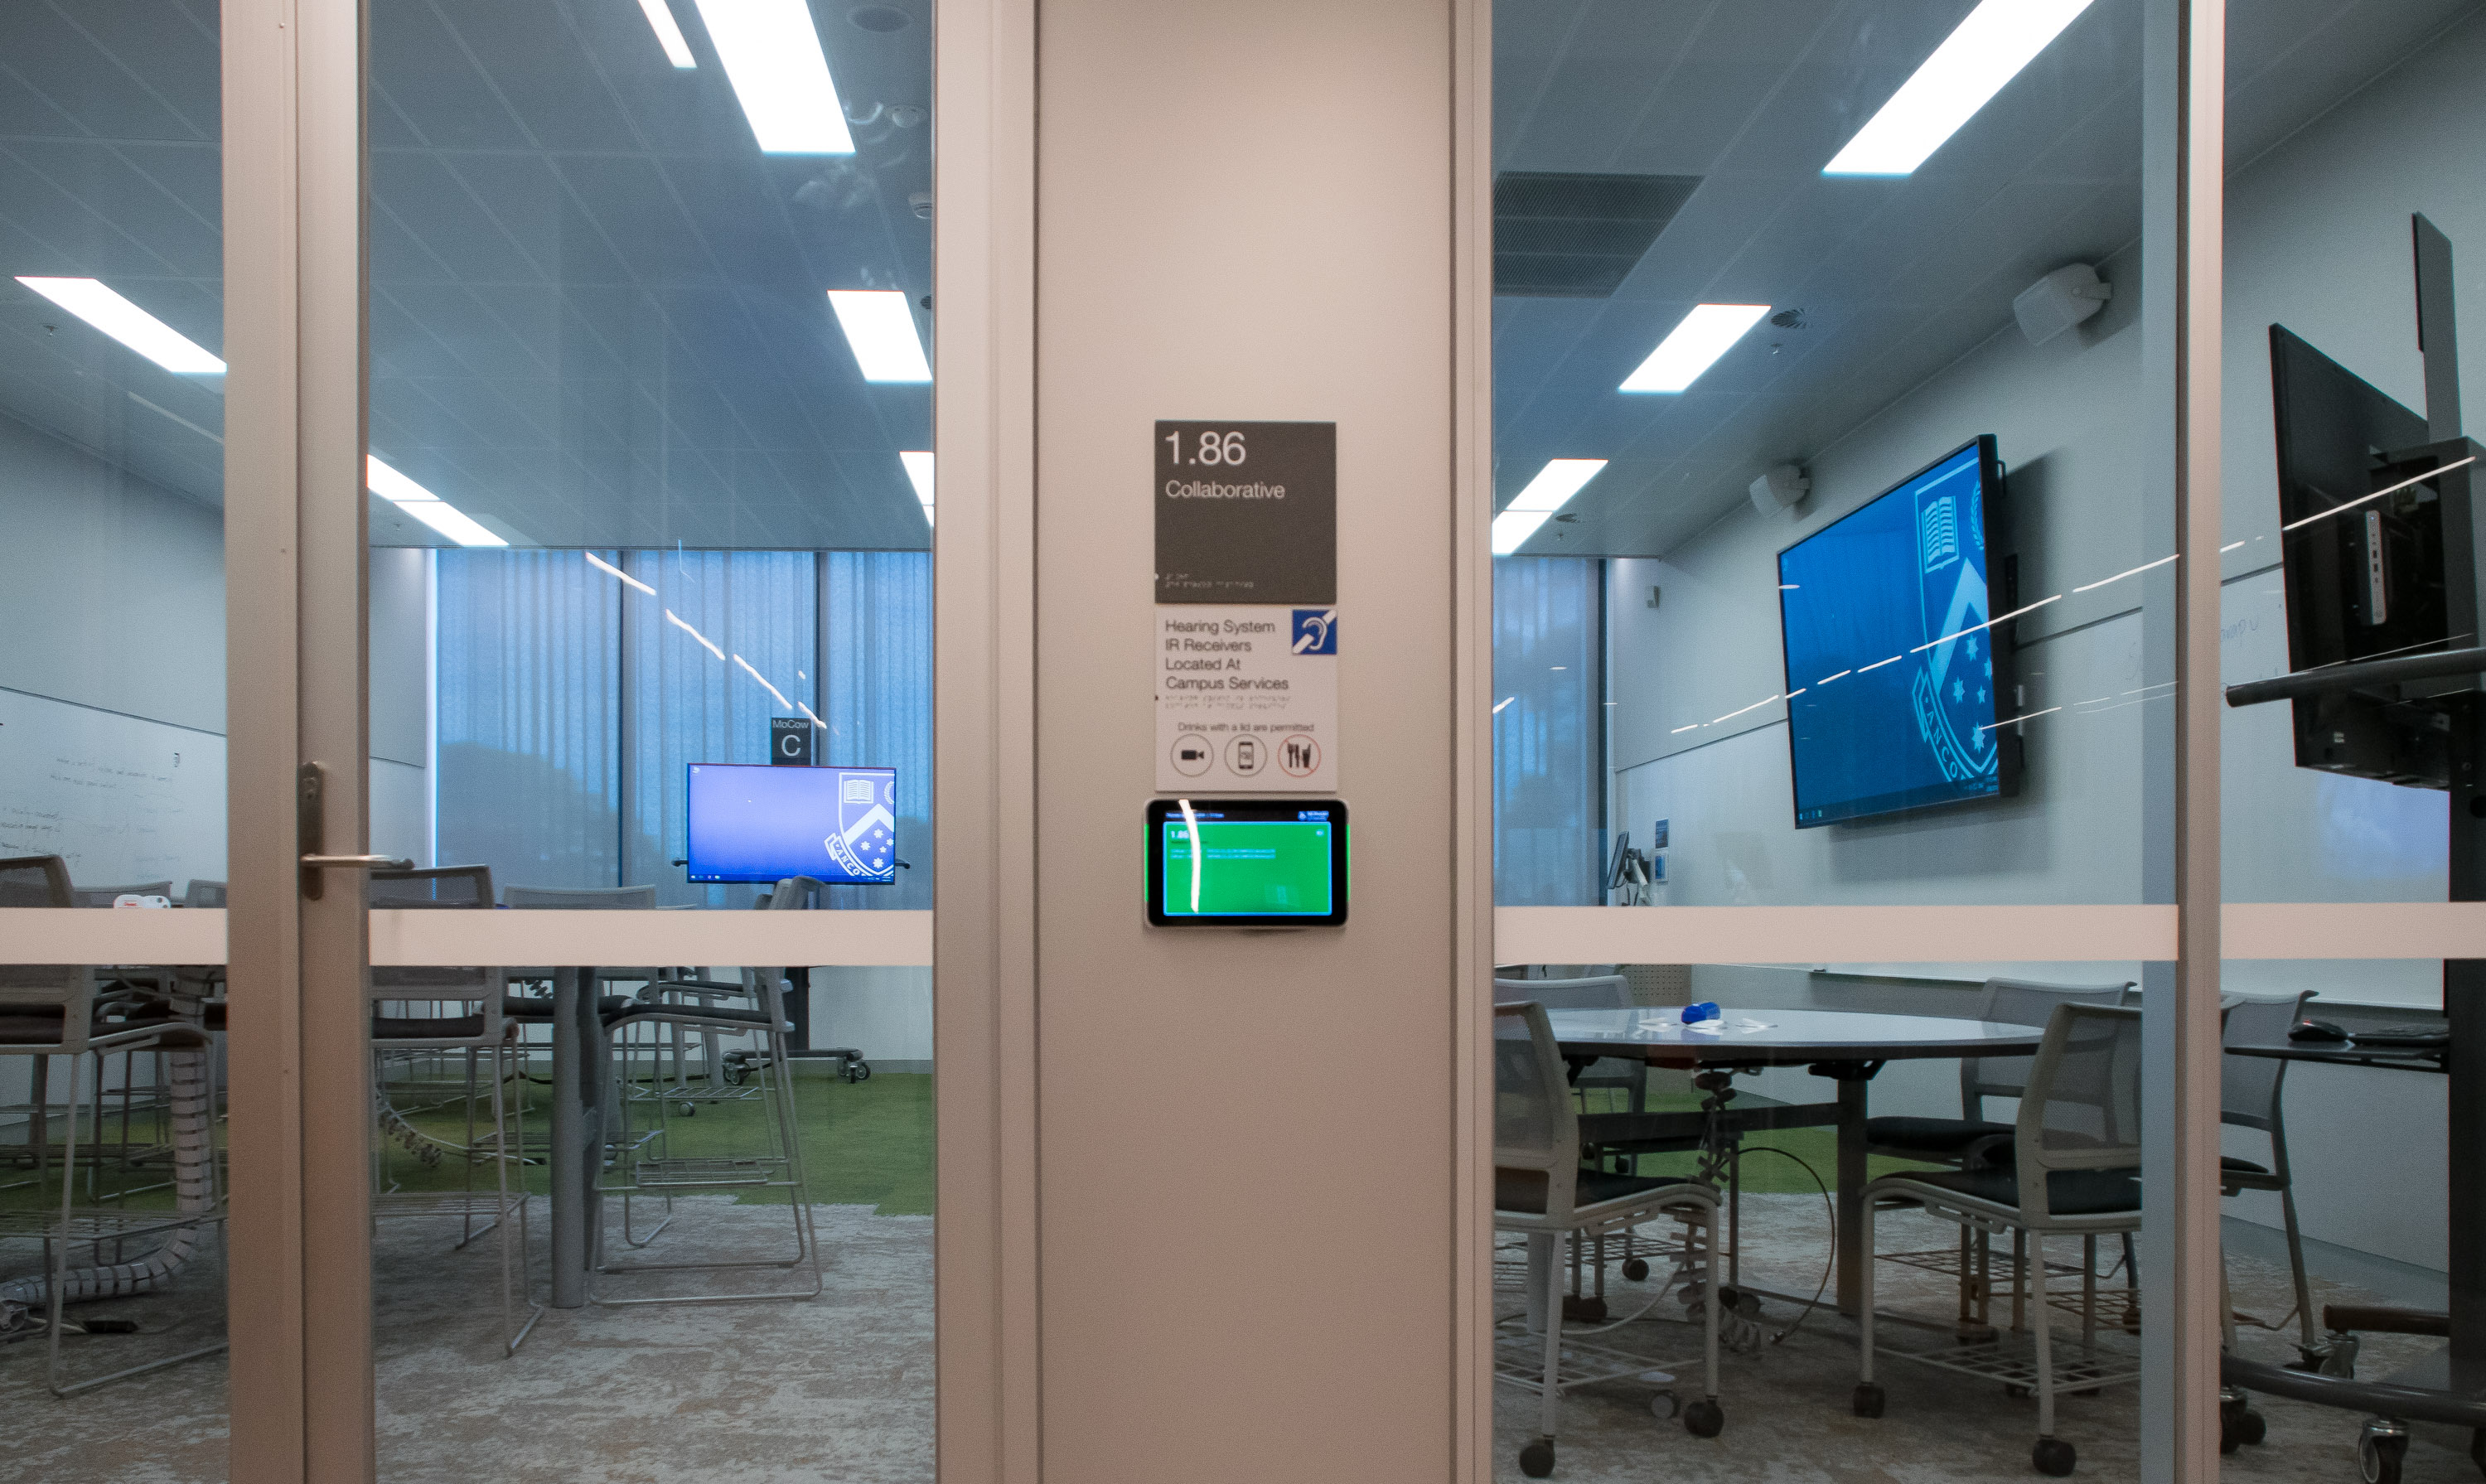 IAdea and Concierge Displays take room booking to the next level at Monash University’s new Learning & Teaching Building